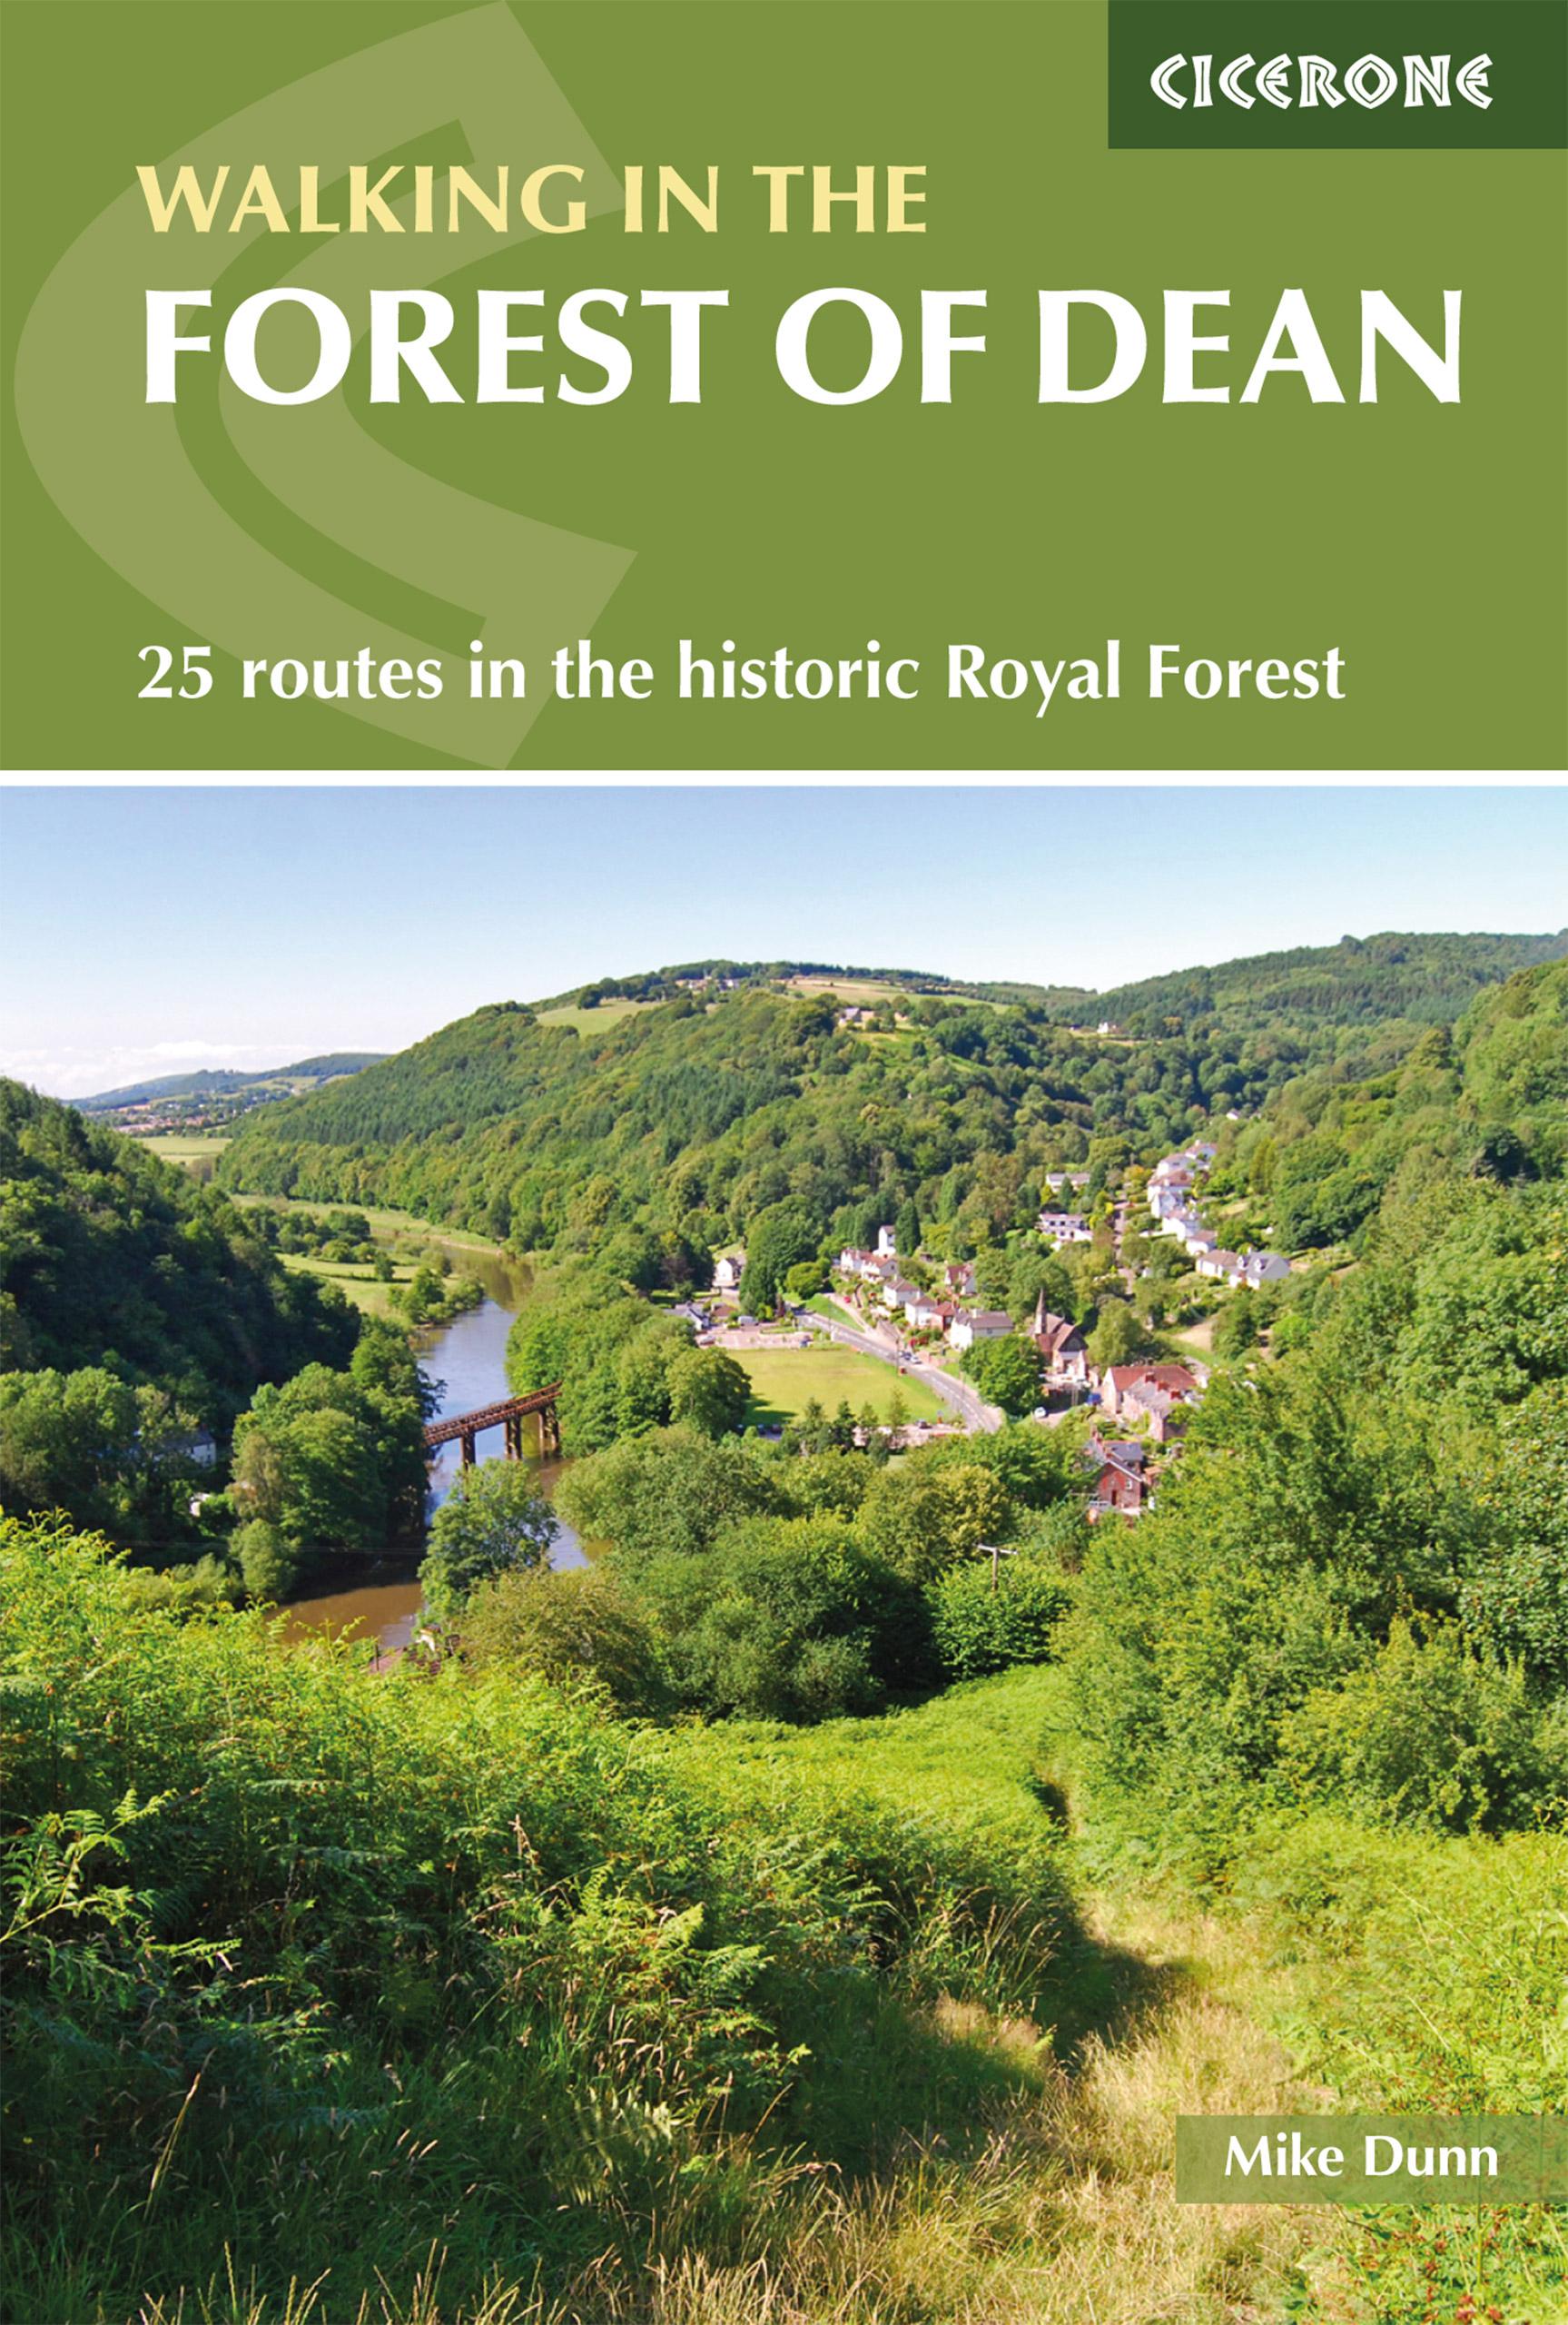 Walking in the Forest of Dean - Mike Dunn